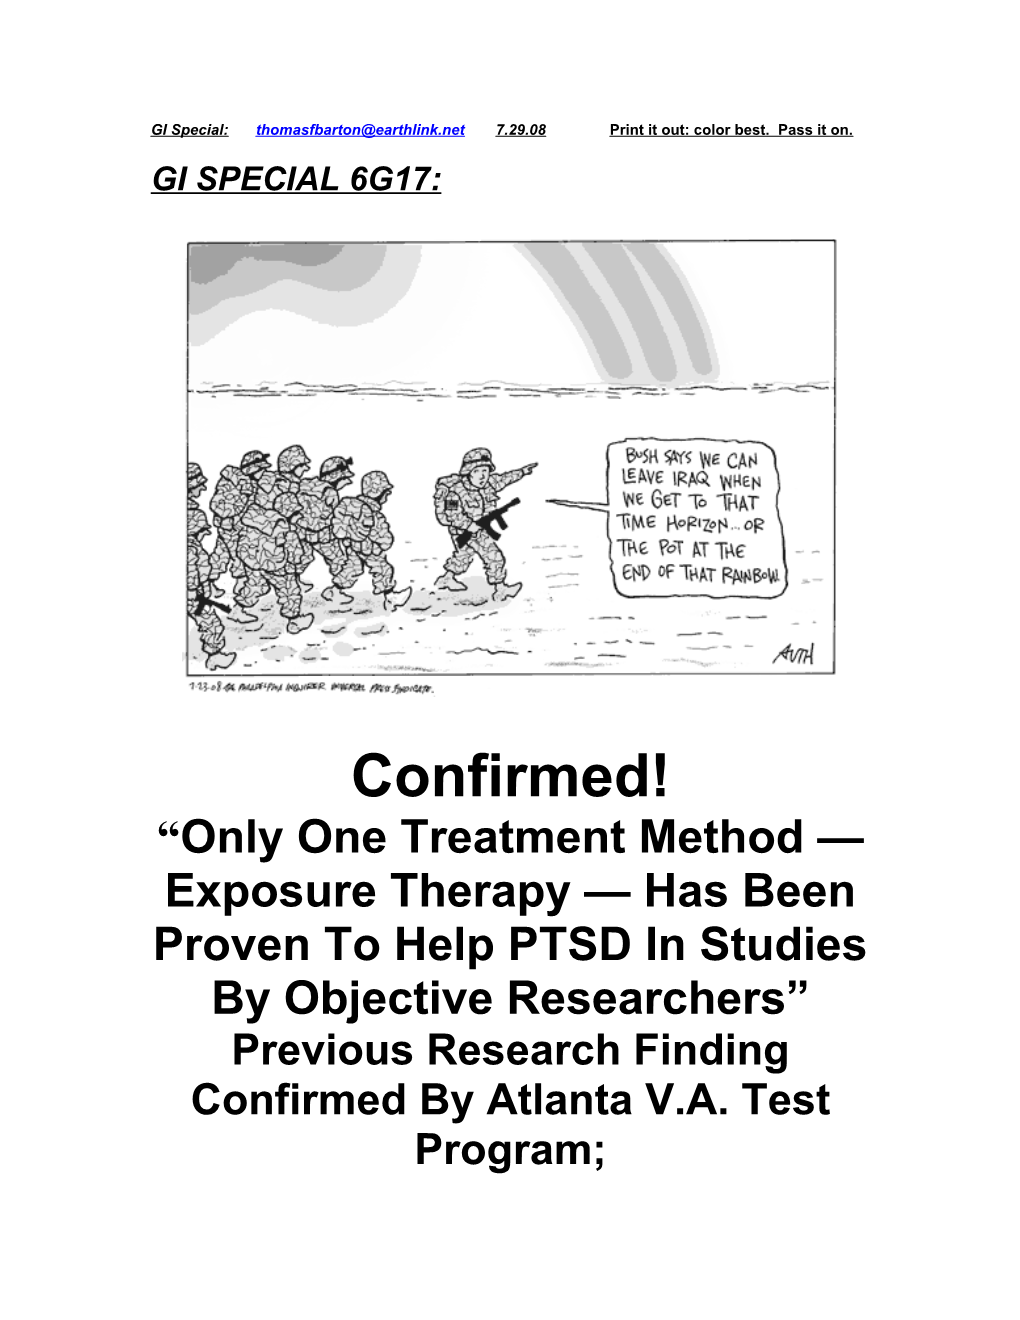 Previous Research Finding Confirmed by Atlanta V.A. Test Program;